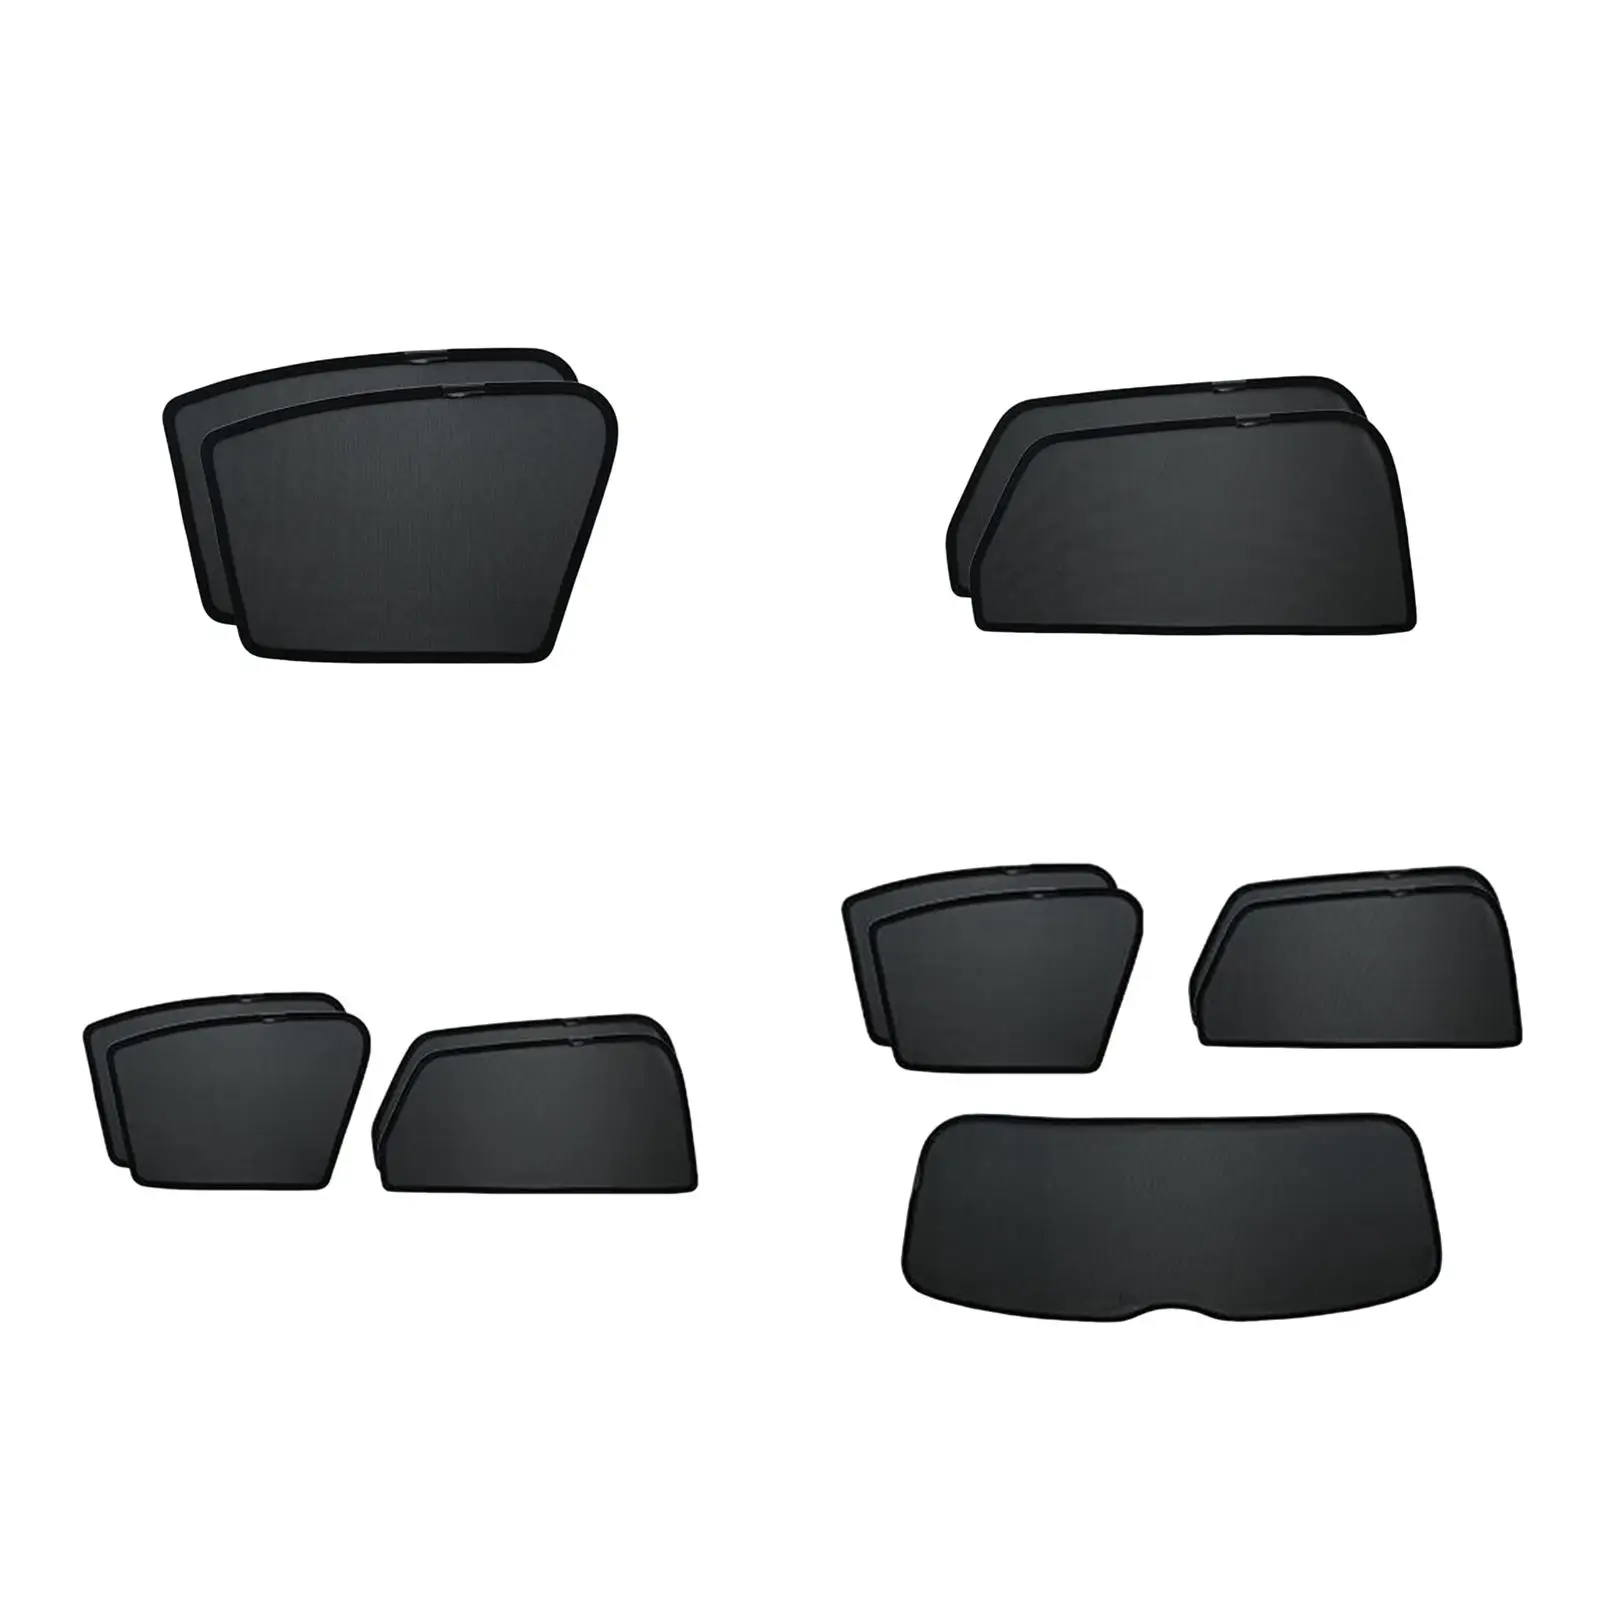 

Car Window Sun Shades Visor Mesh Keeps Vehicle Cool Accessory Protector Durable Window Sunshades for Byd Atto 3 Yuan Plus